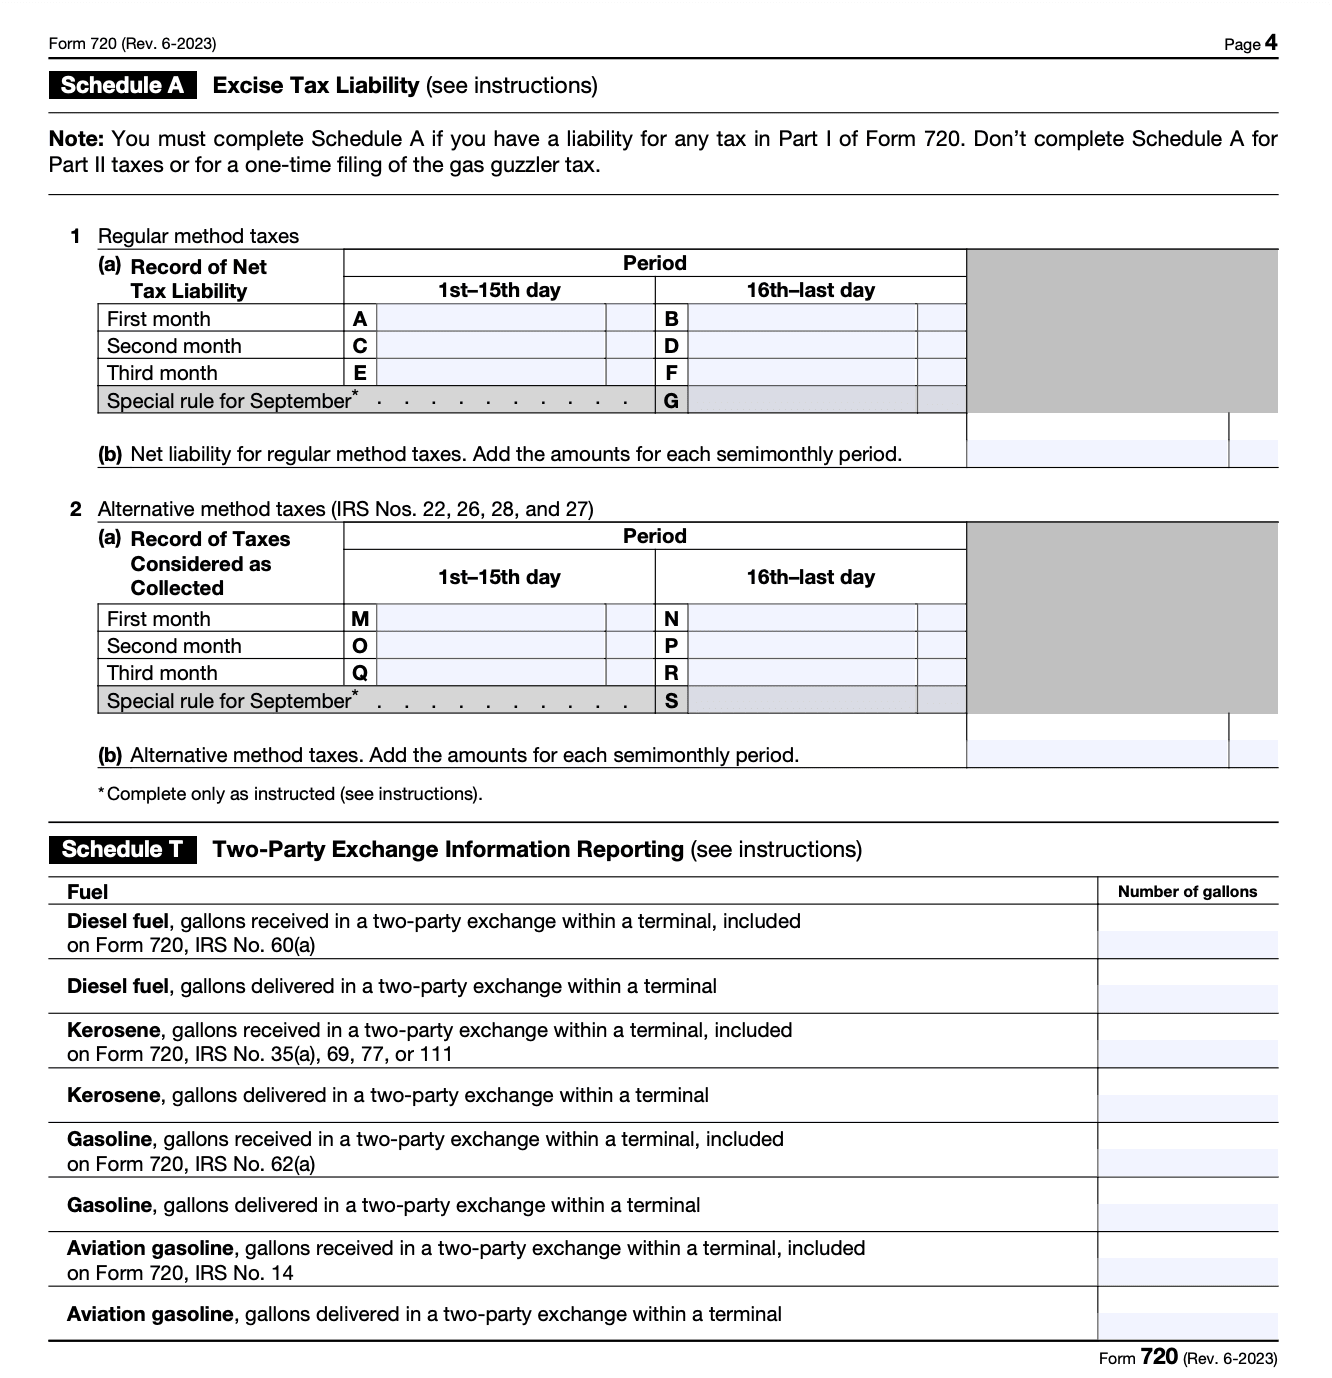 form-720-schedule-a-t.png